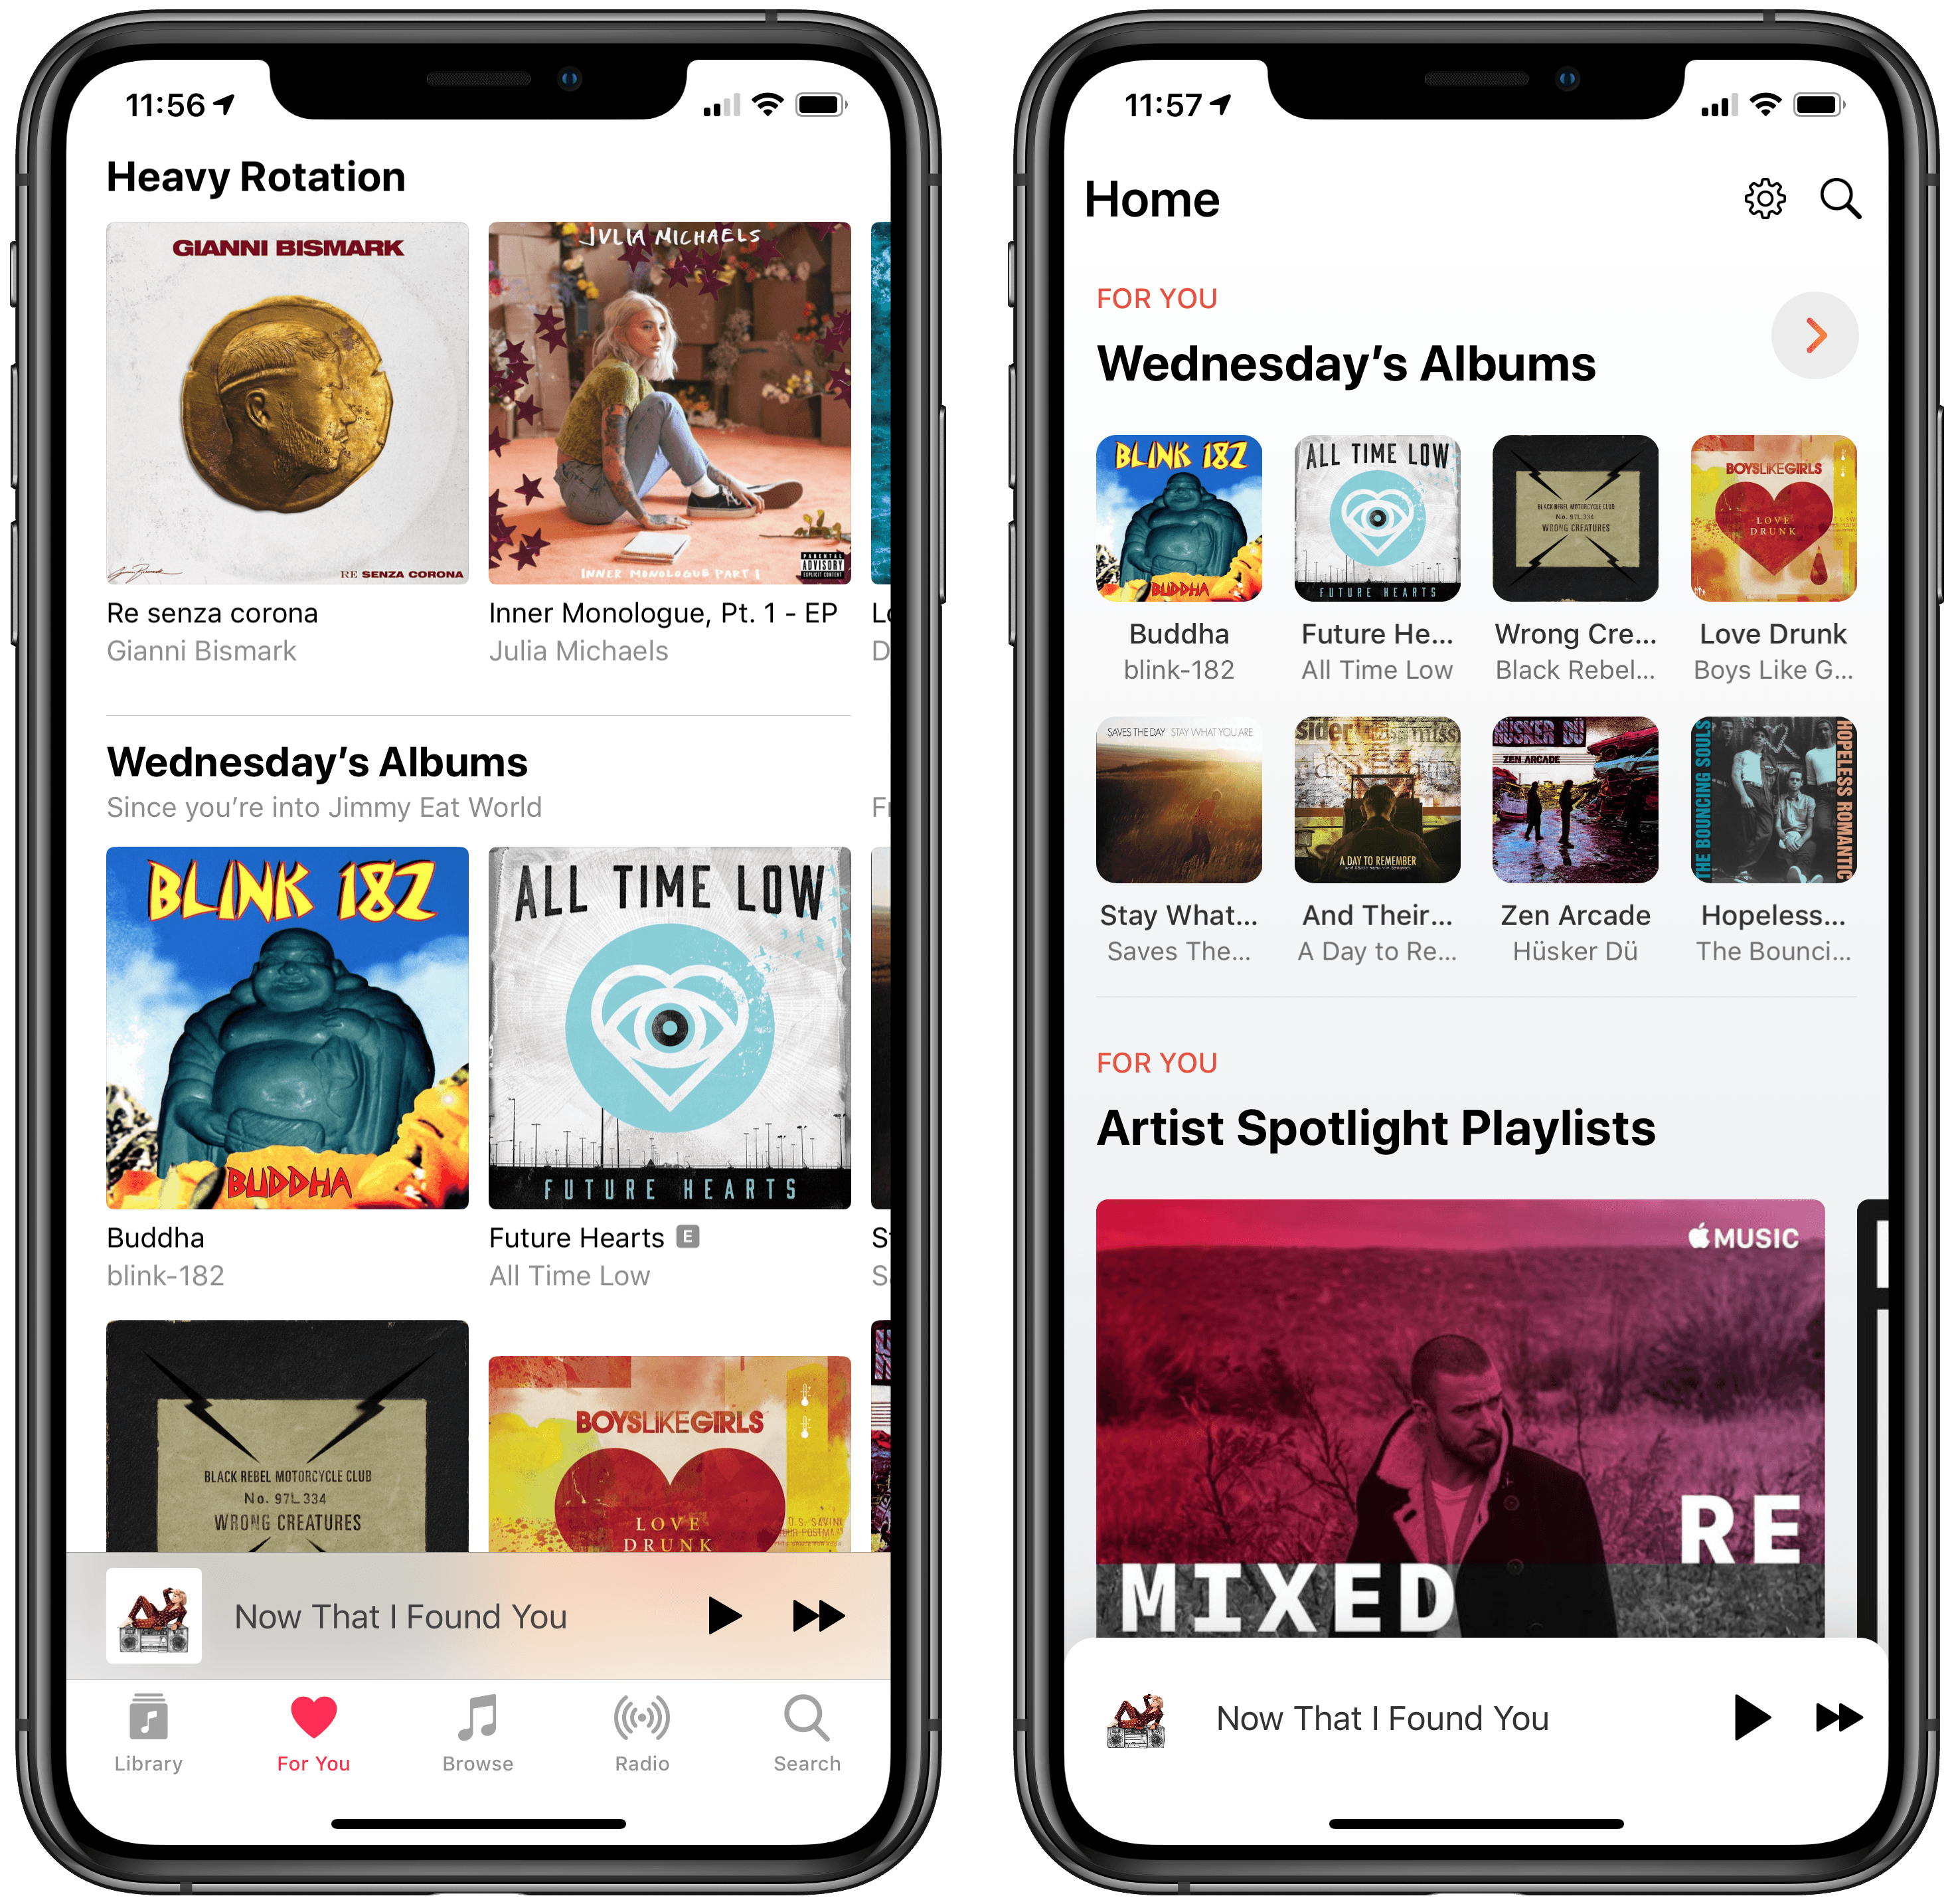 For You in Apple Music (left) and Soor.